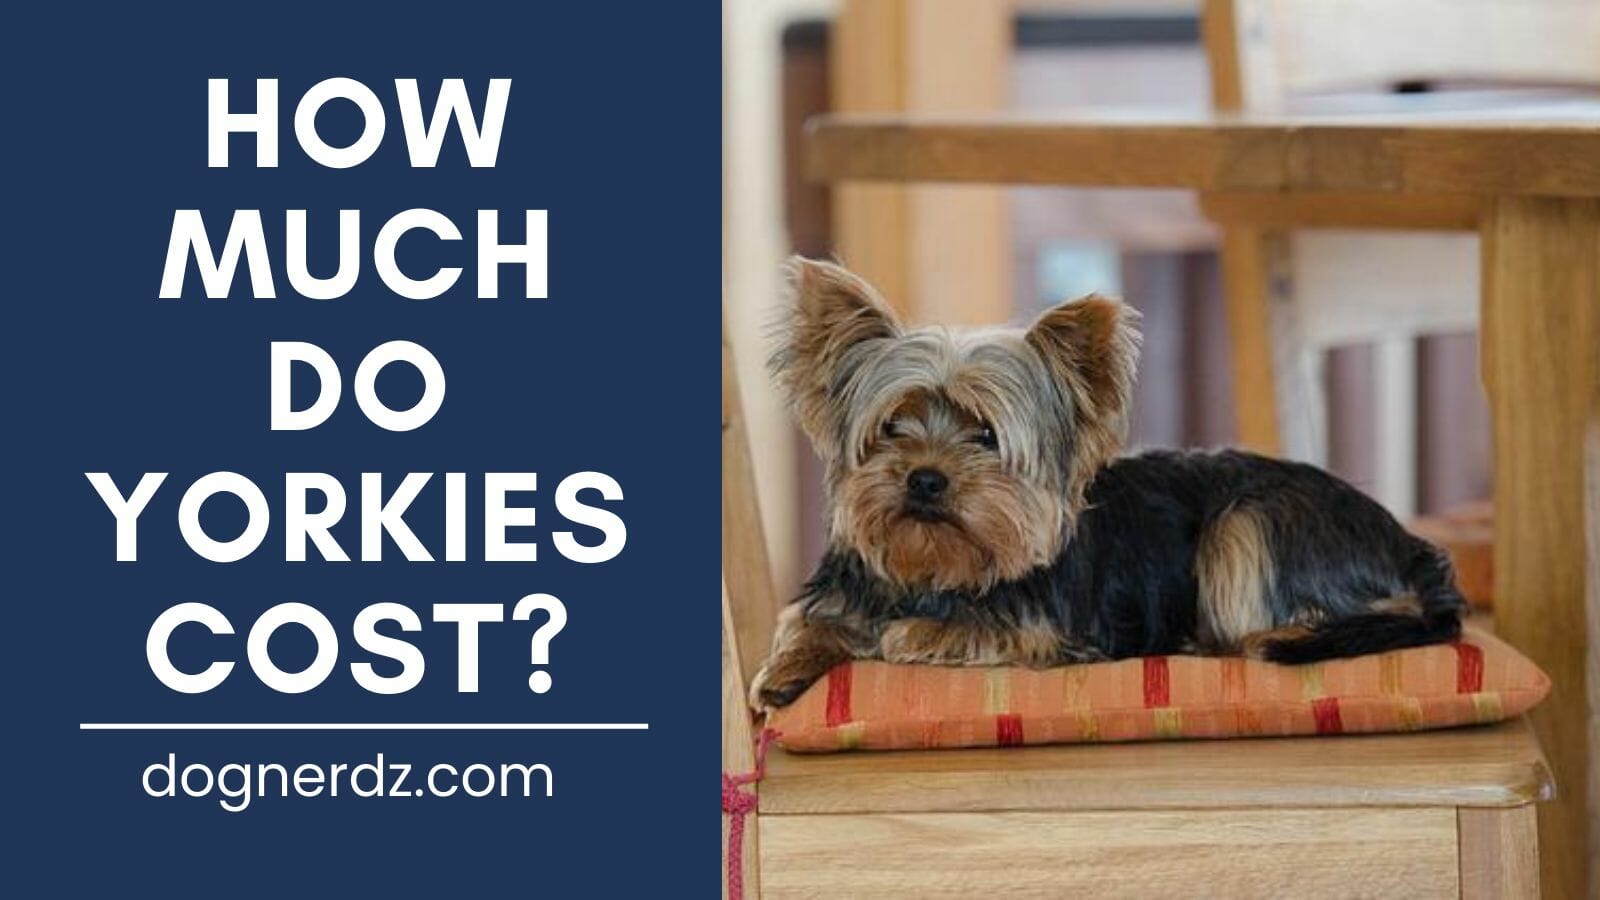 A Guide to Dog Breeds: How Much Do Yorkies Cost?